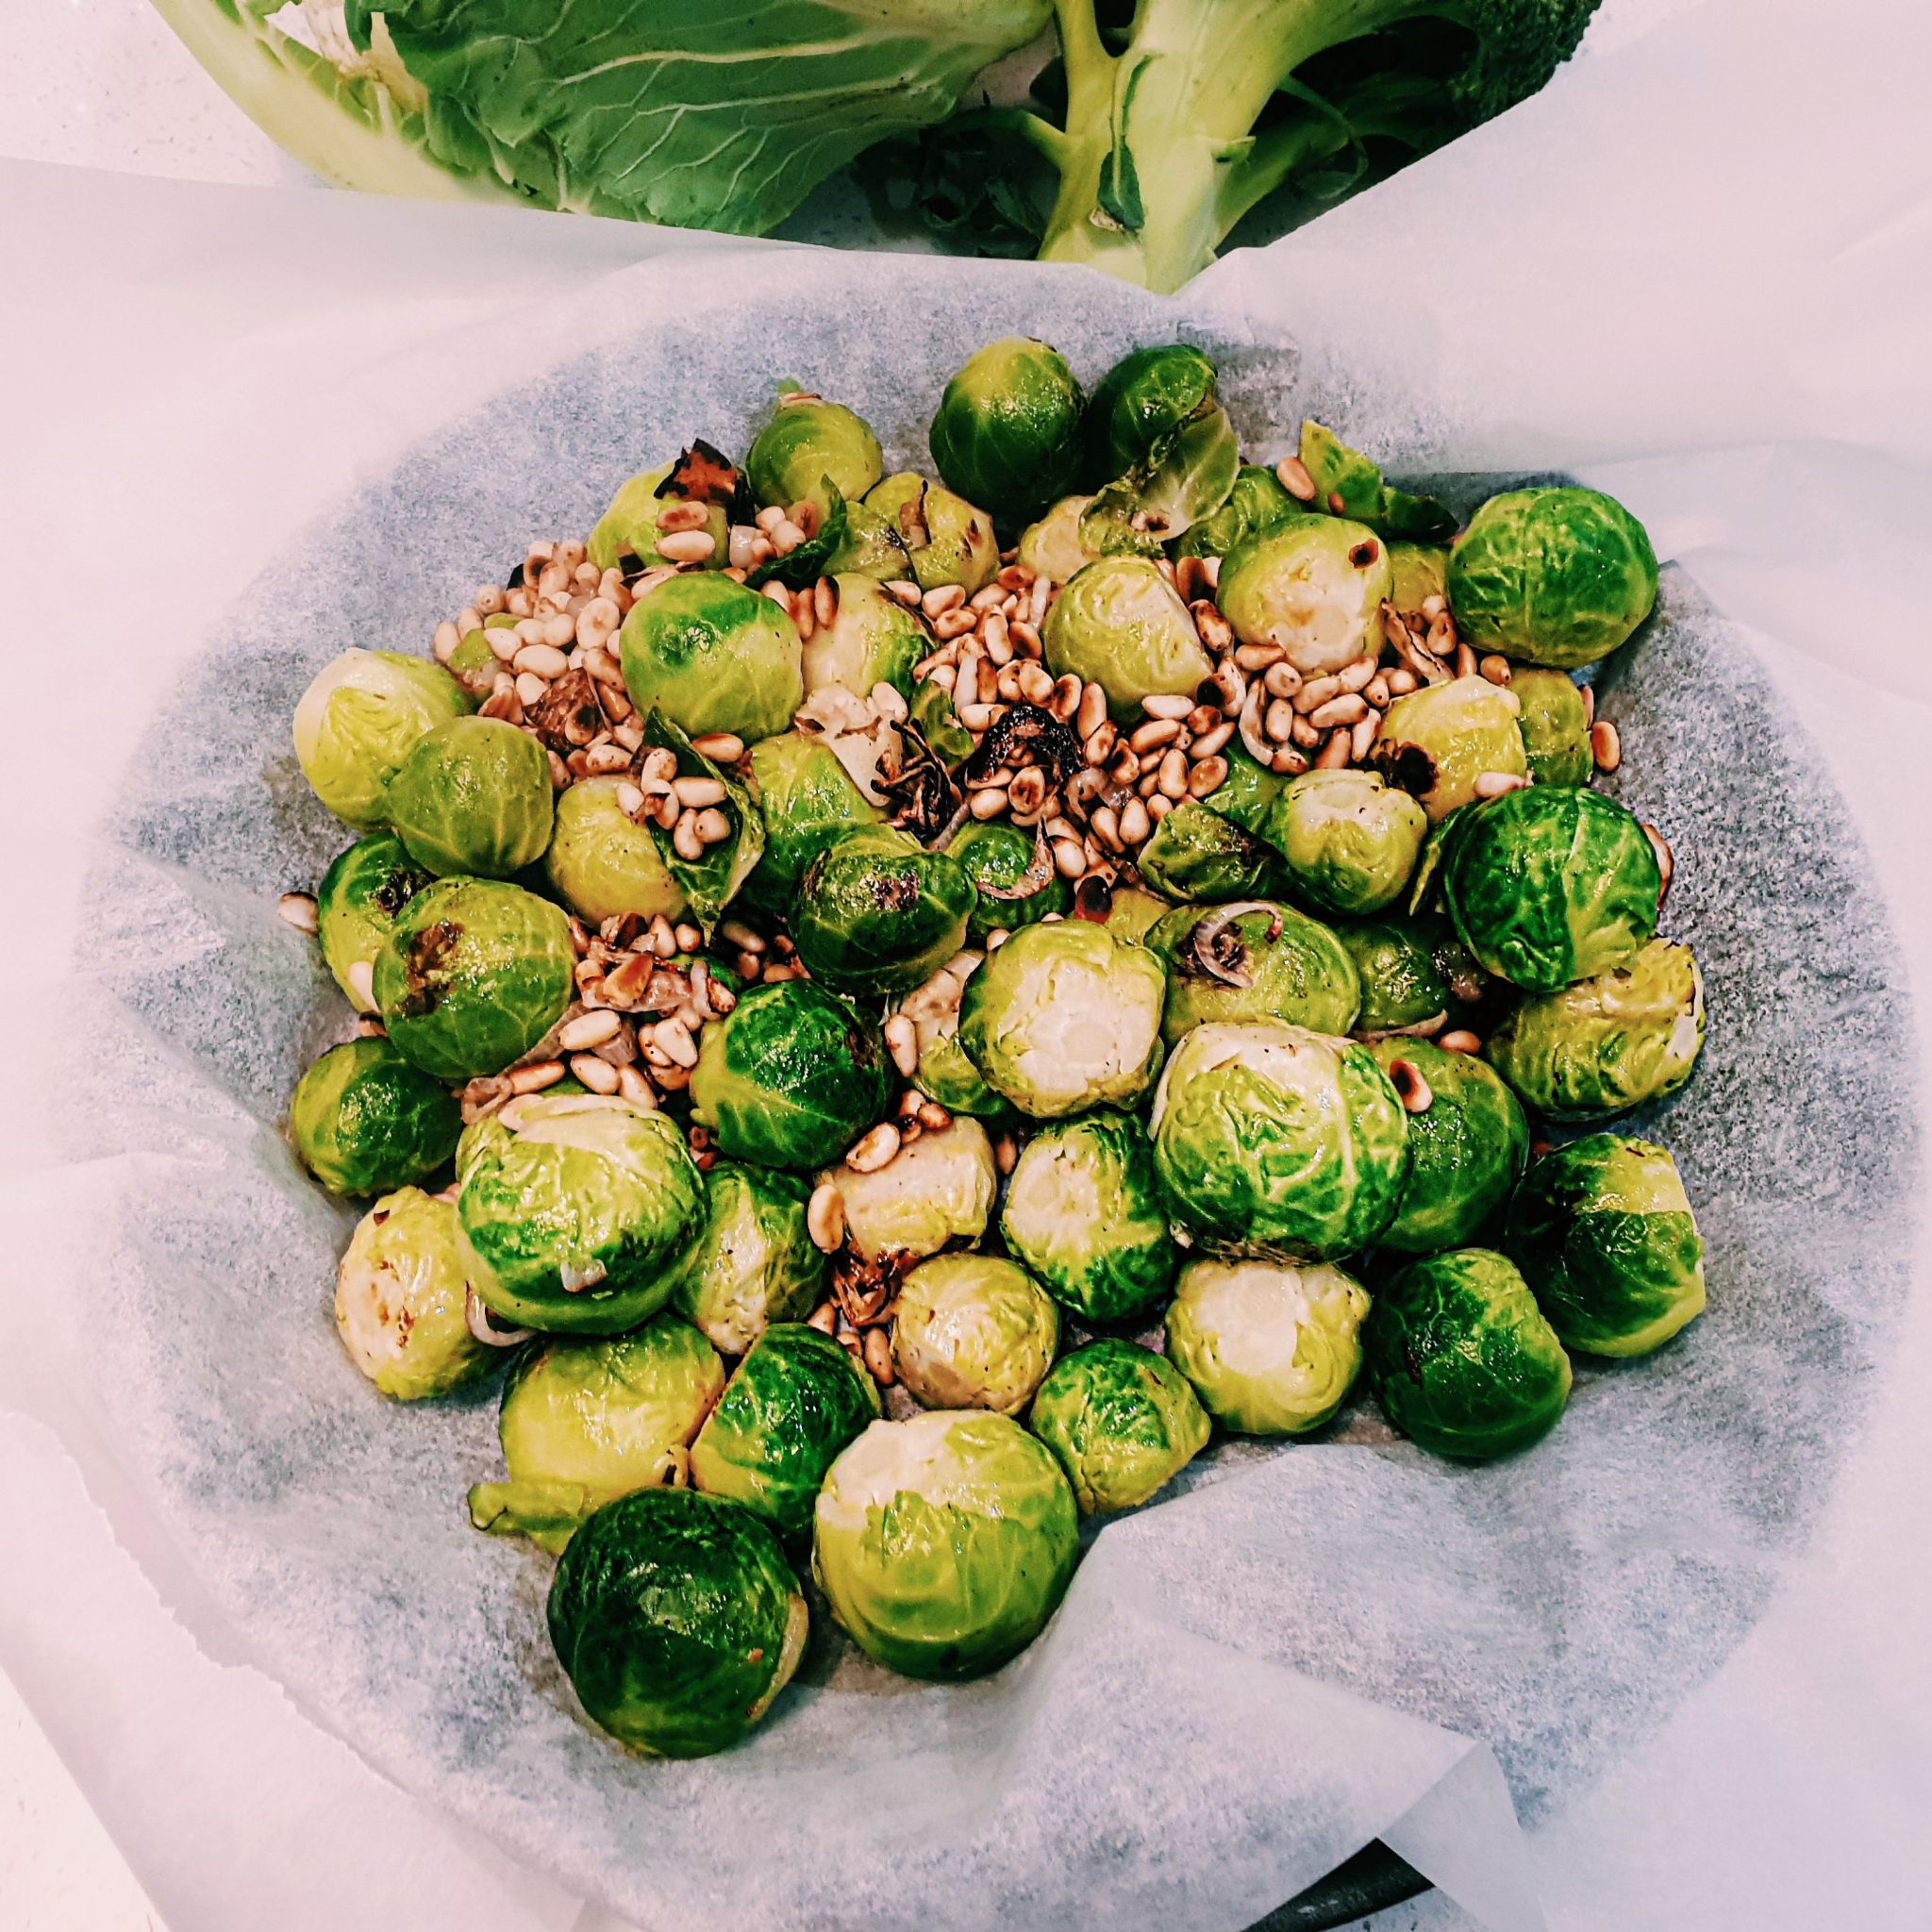 Brussel Sprouts and Pine nuts